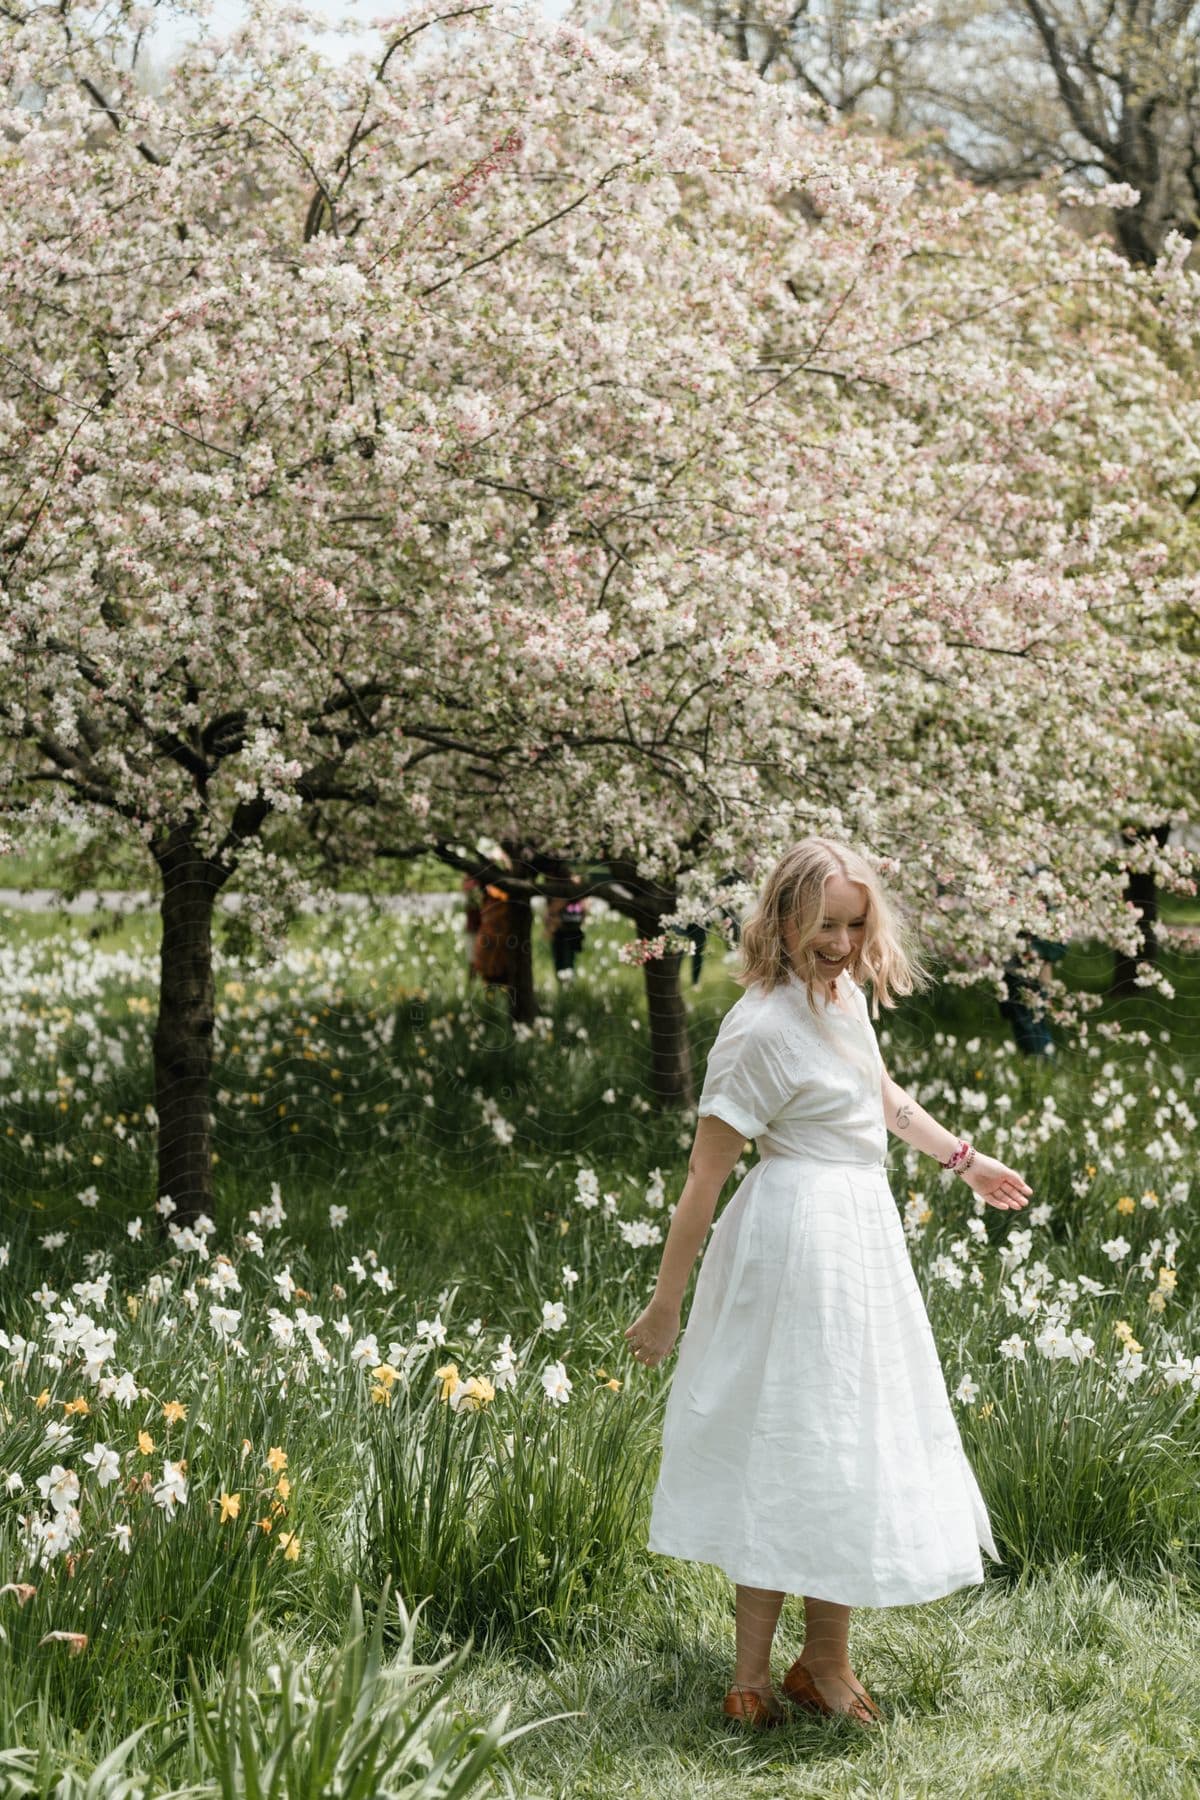 A woman in a white dress enjoying a stroll among blossoming trees in a lush garden.